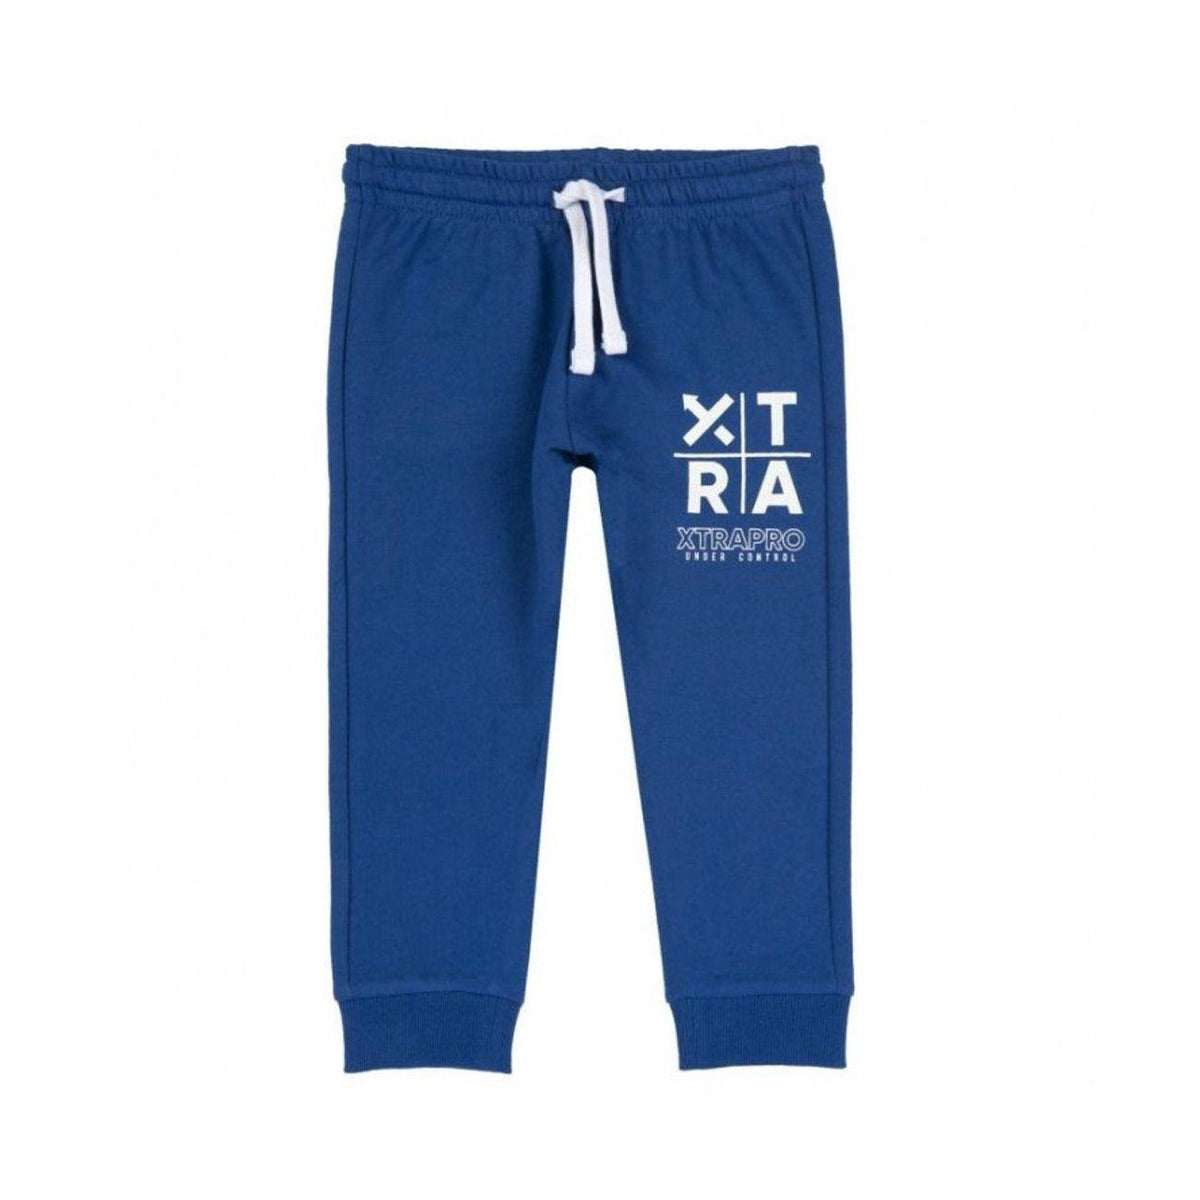 Premium Quality &quot;XTRAPRO&quot; Printed Sports Terry Trouser For Kids - Brands River